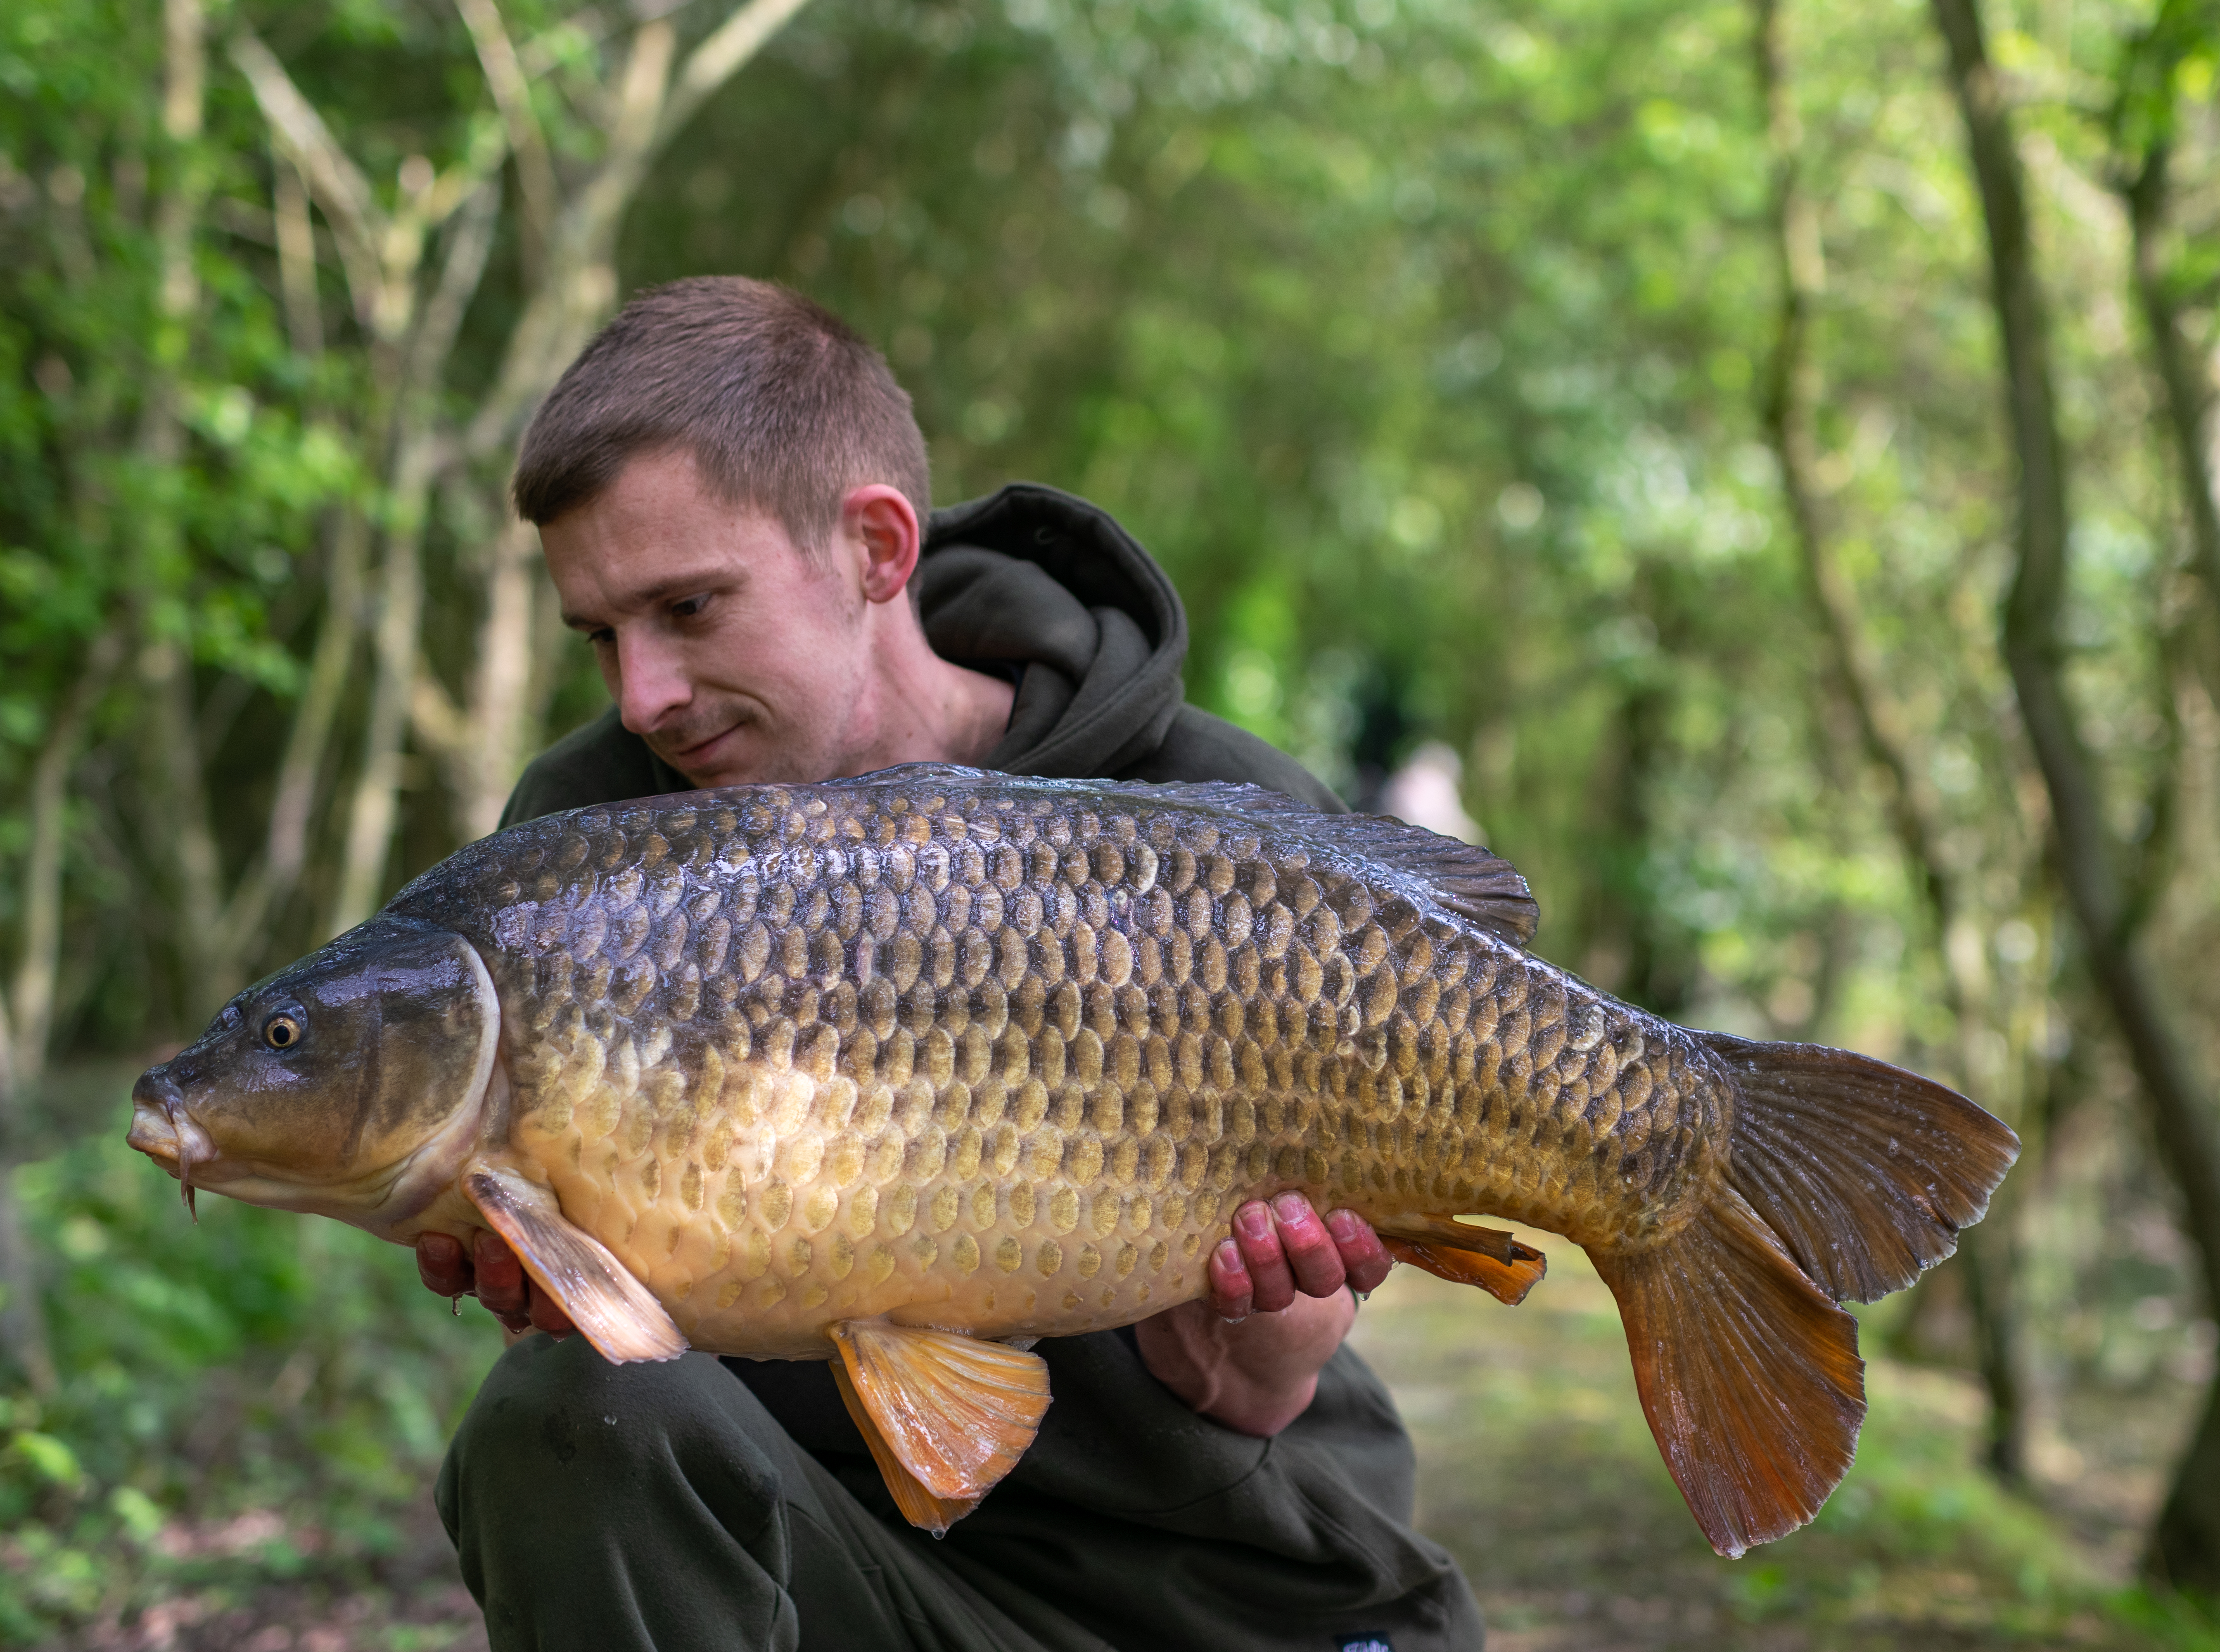 Jack with a Spring Common Carp